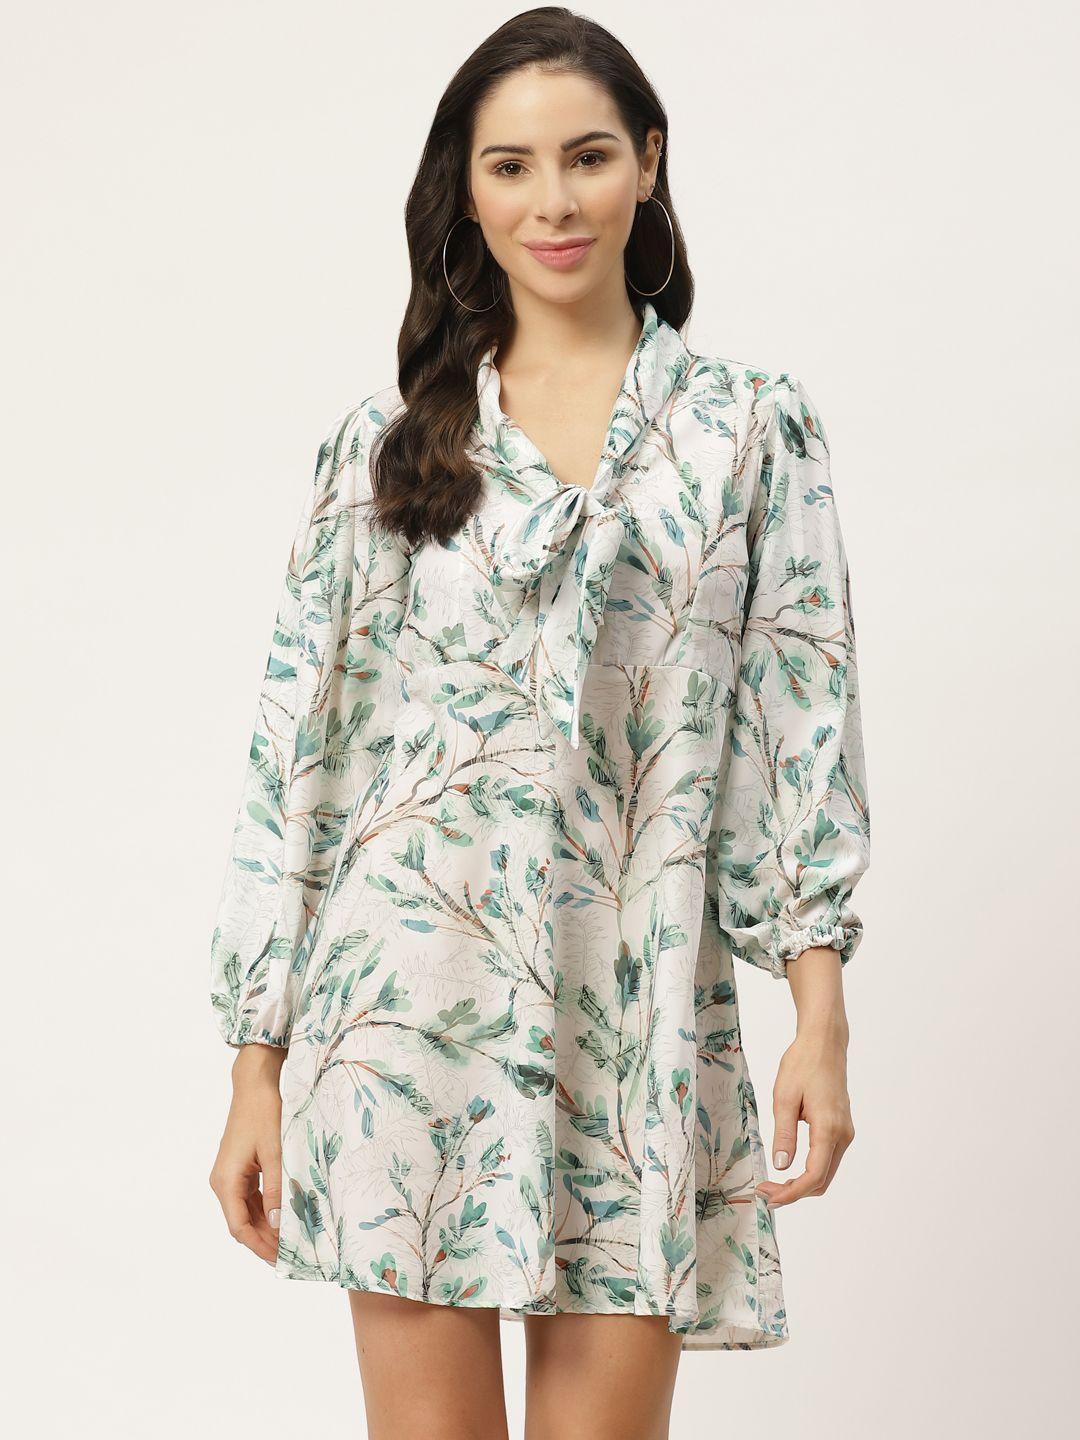 meloso women off-white & green printed a-line dress